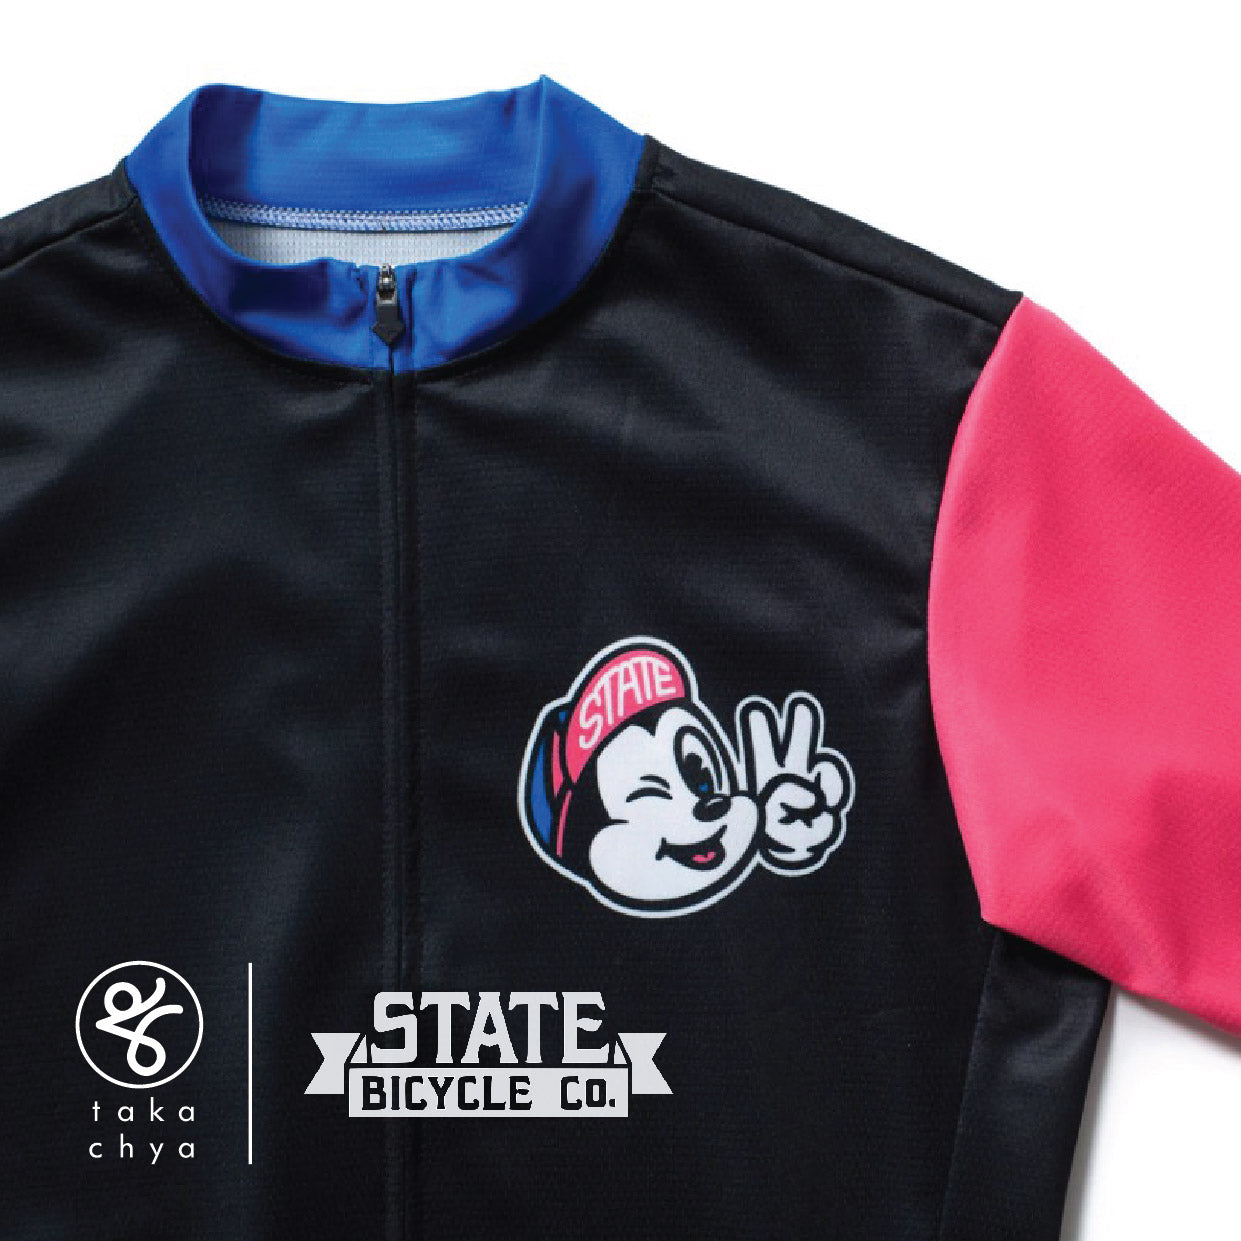 STATE BICYCLE CO. - "RELAX.." JERSEY - SUSTAINABLE CLOTHING COLLECTION (BLACK)